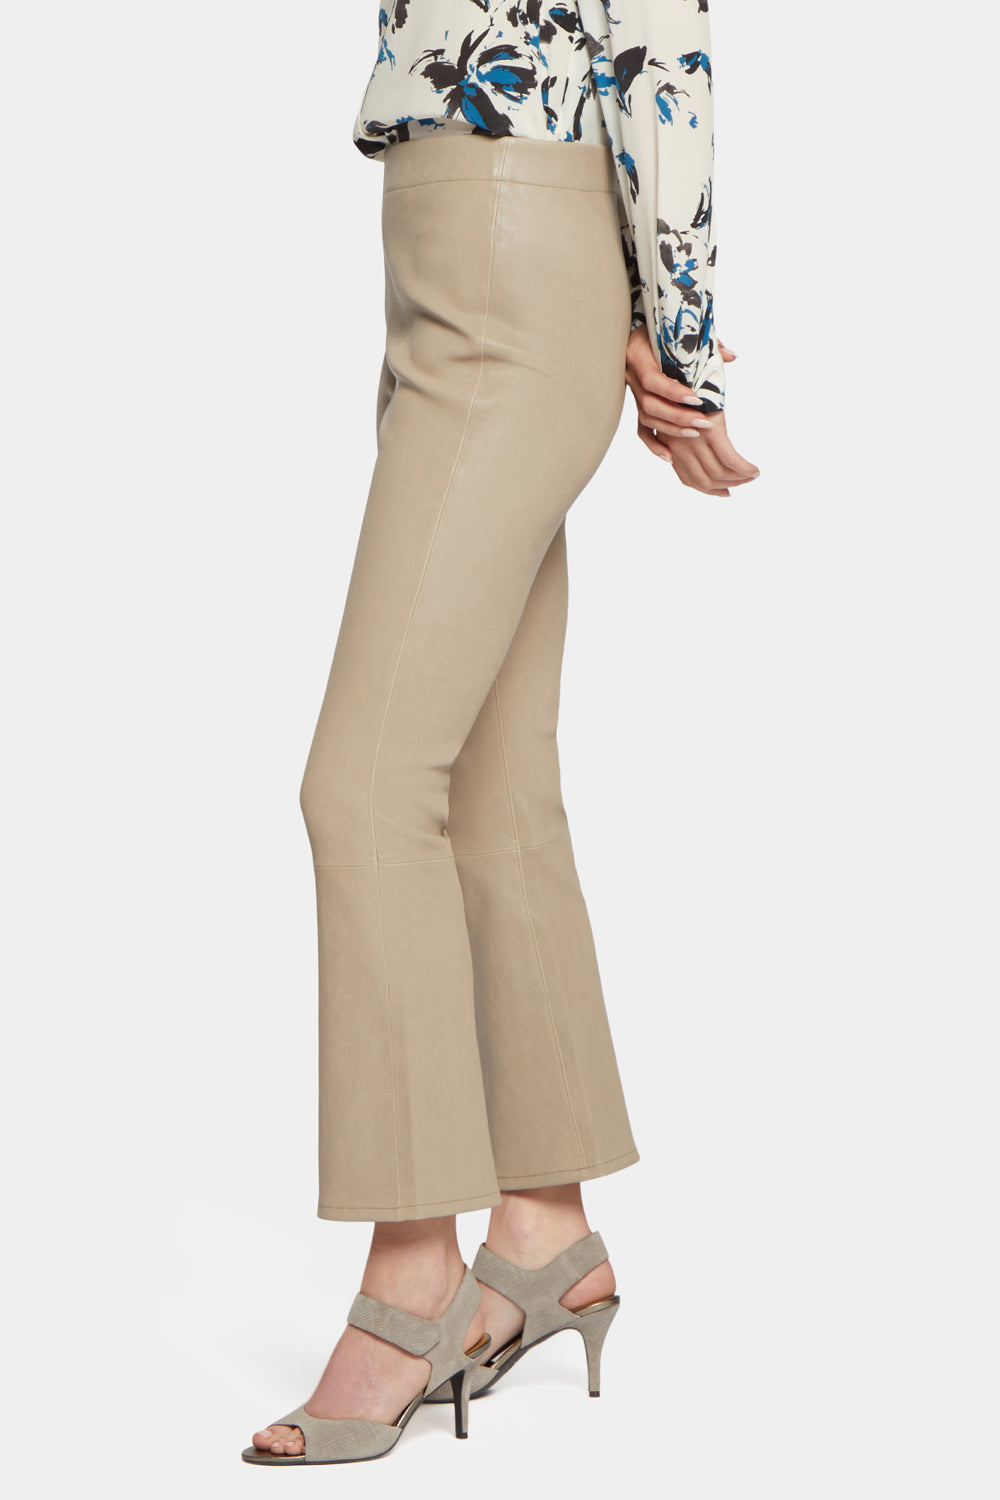 2023 Autumn Womens Gaberdine Rider Style Prana Slim Fit Pants High Quality  Fashion Accessory With Side Braid From Blossommg, $166.57